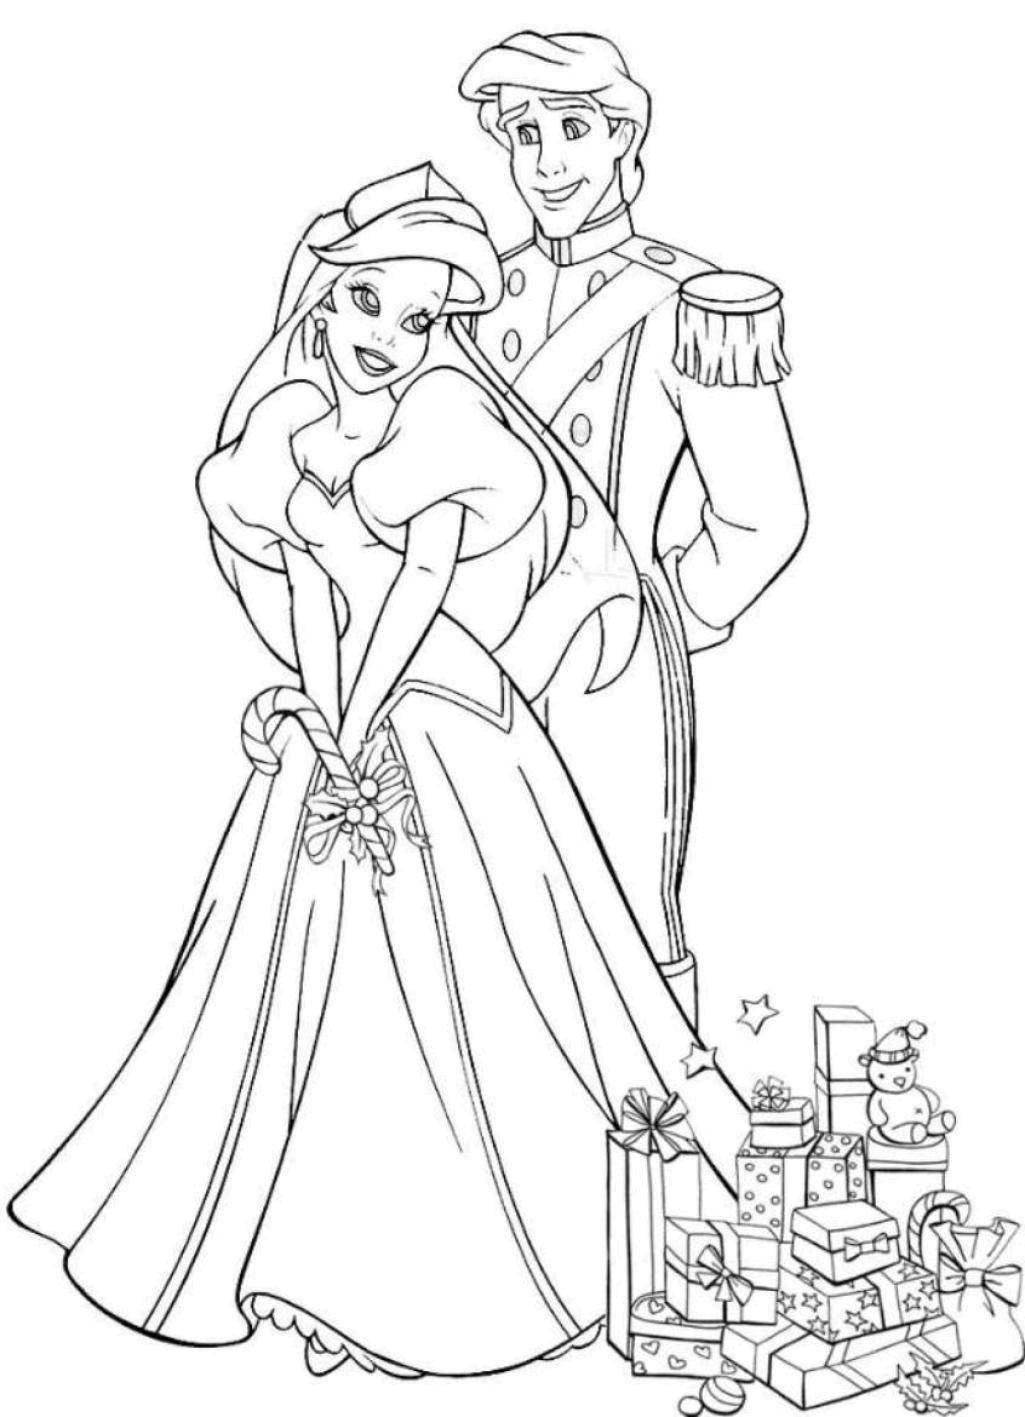 Coloring Ariel with her beloved. Category Wedding. Tags:  Wedding, dress, bride, groom.